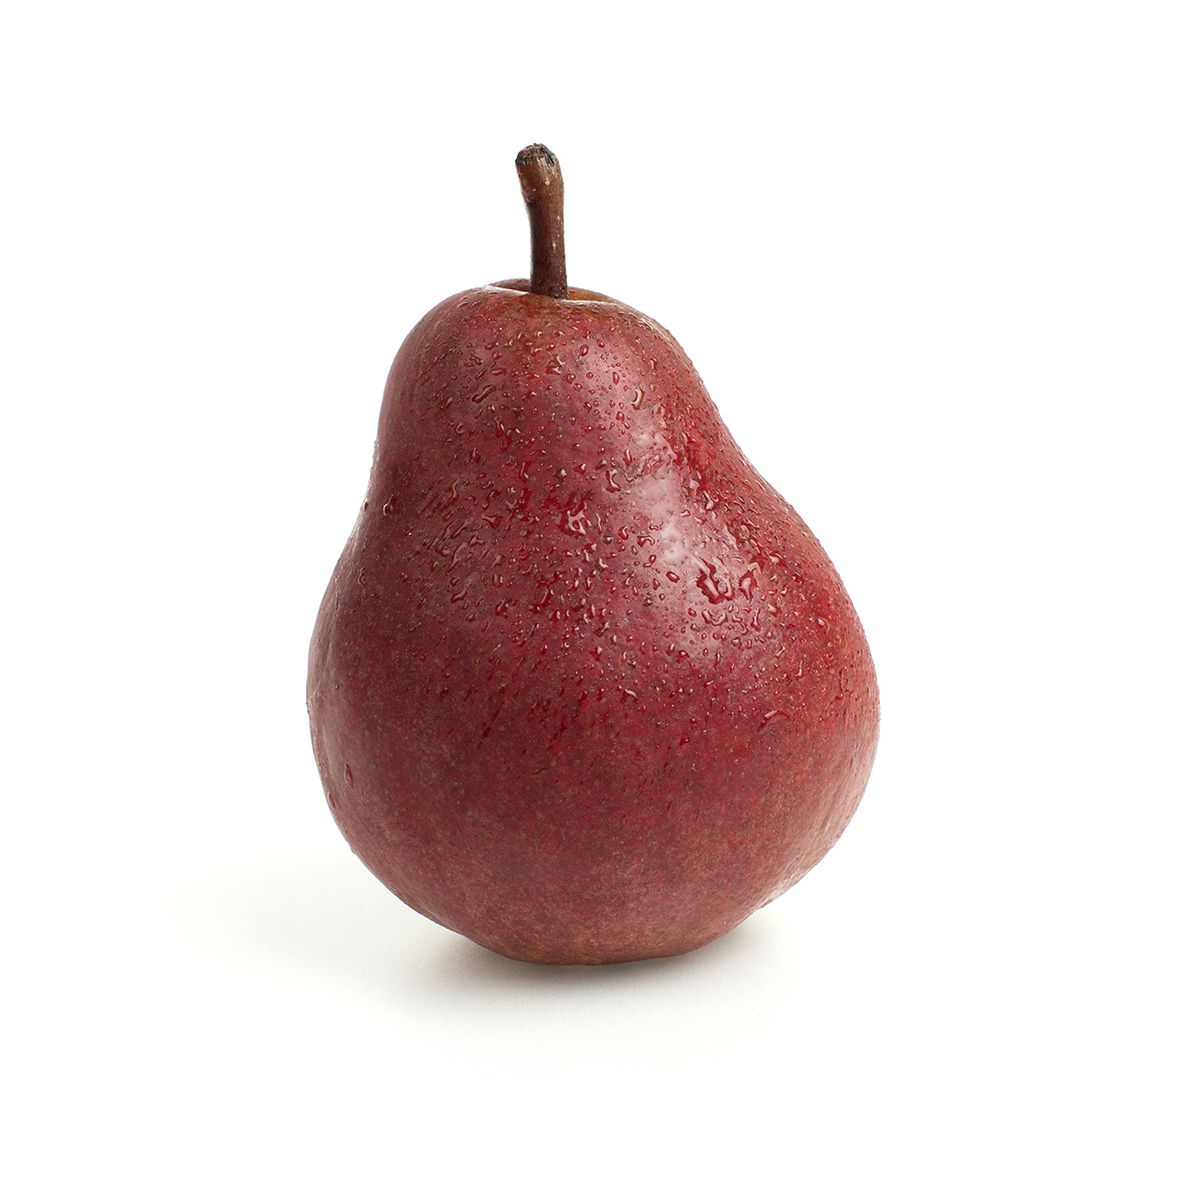 MISSING WEIGHT - BoxNCase Organic Red Danjou Pears